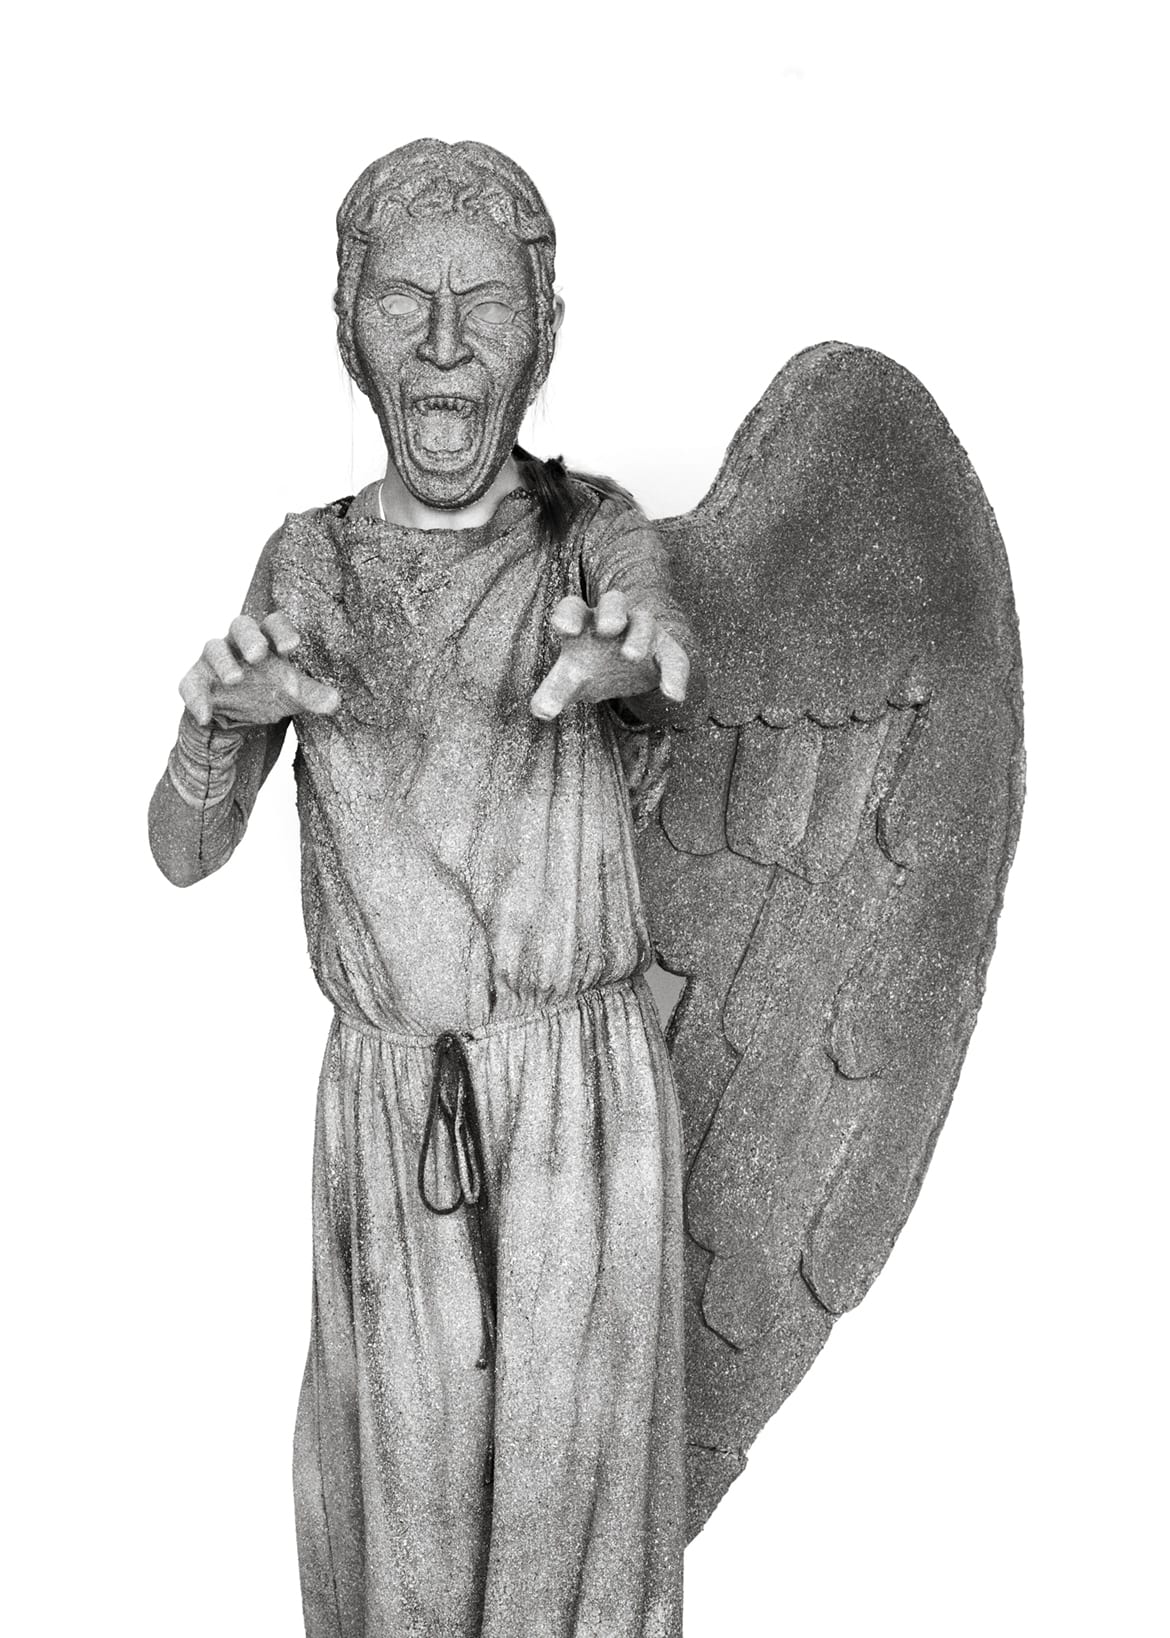 Alexis Cournoyer as weeping angel from Doctor Who